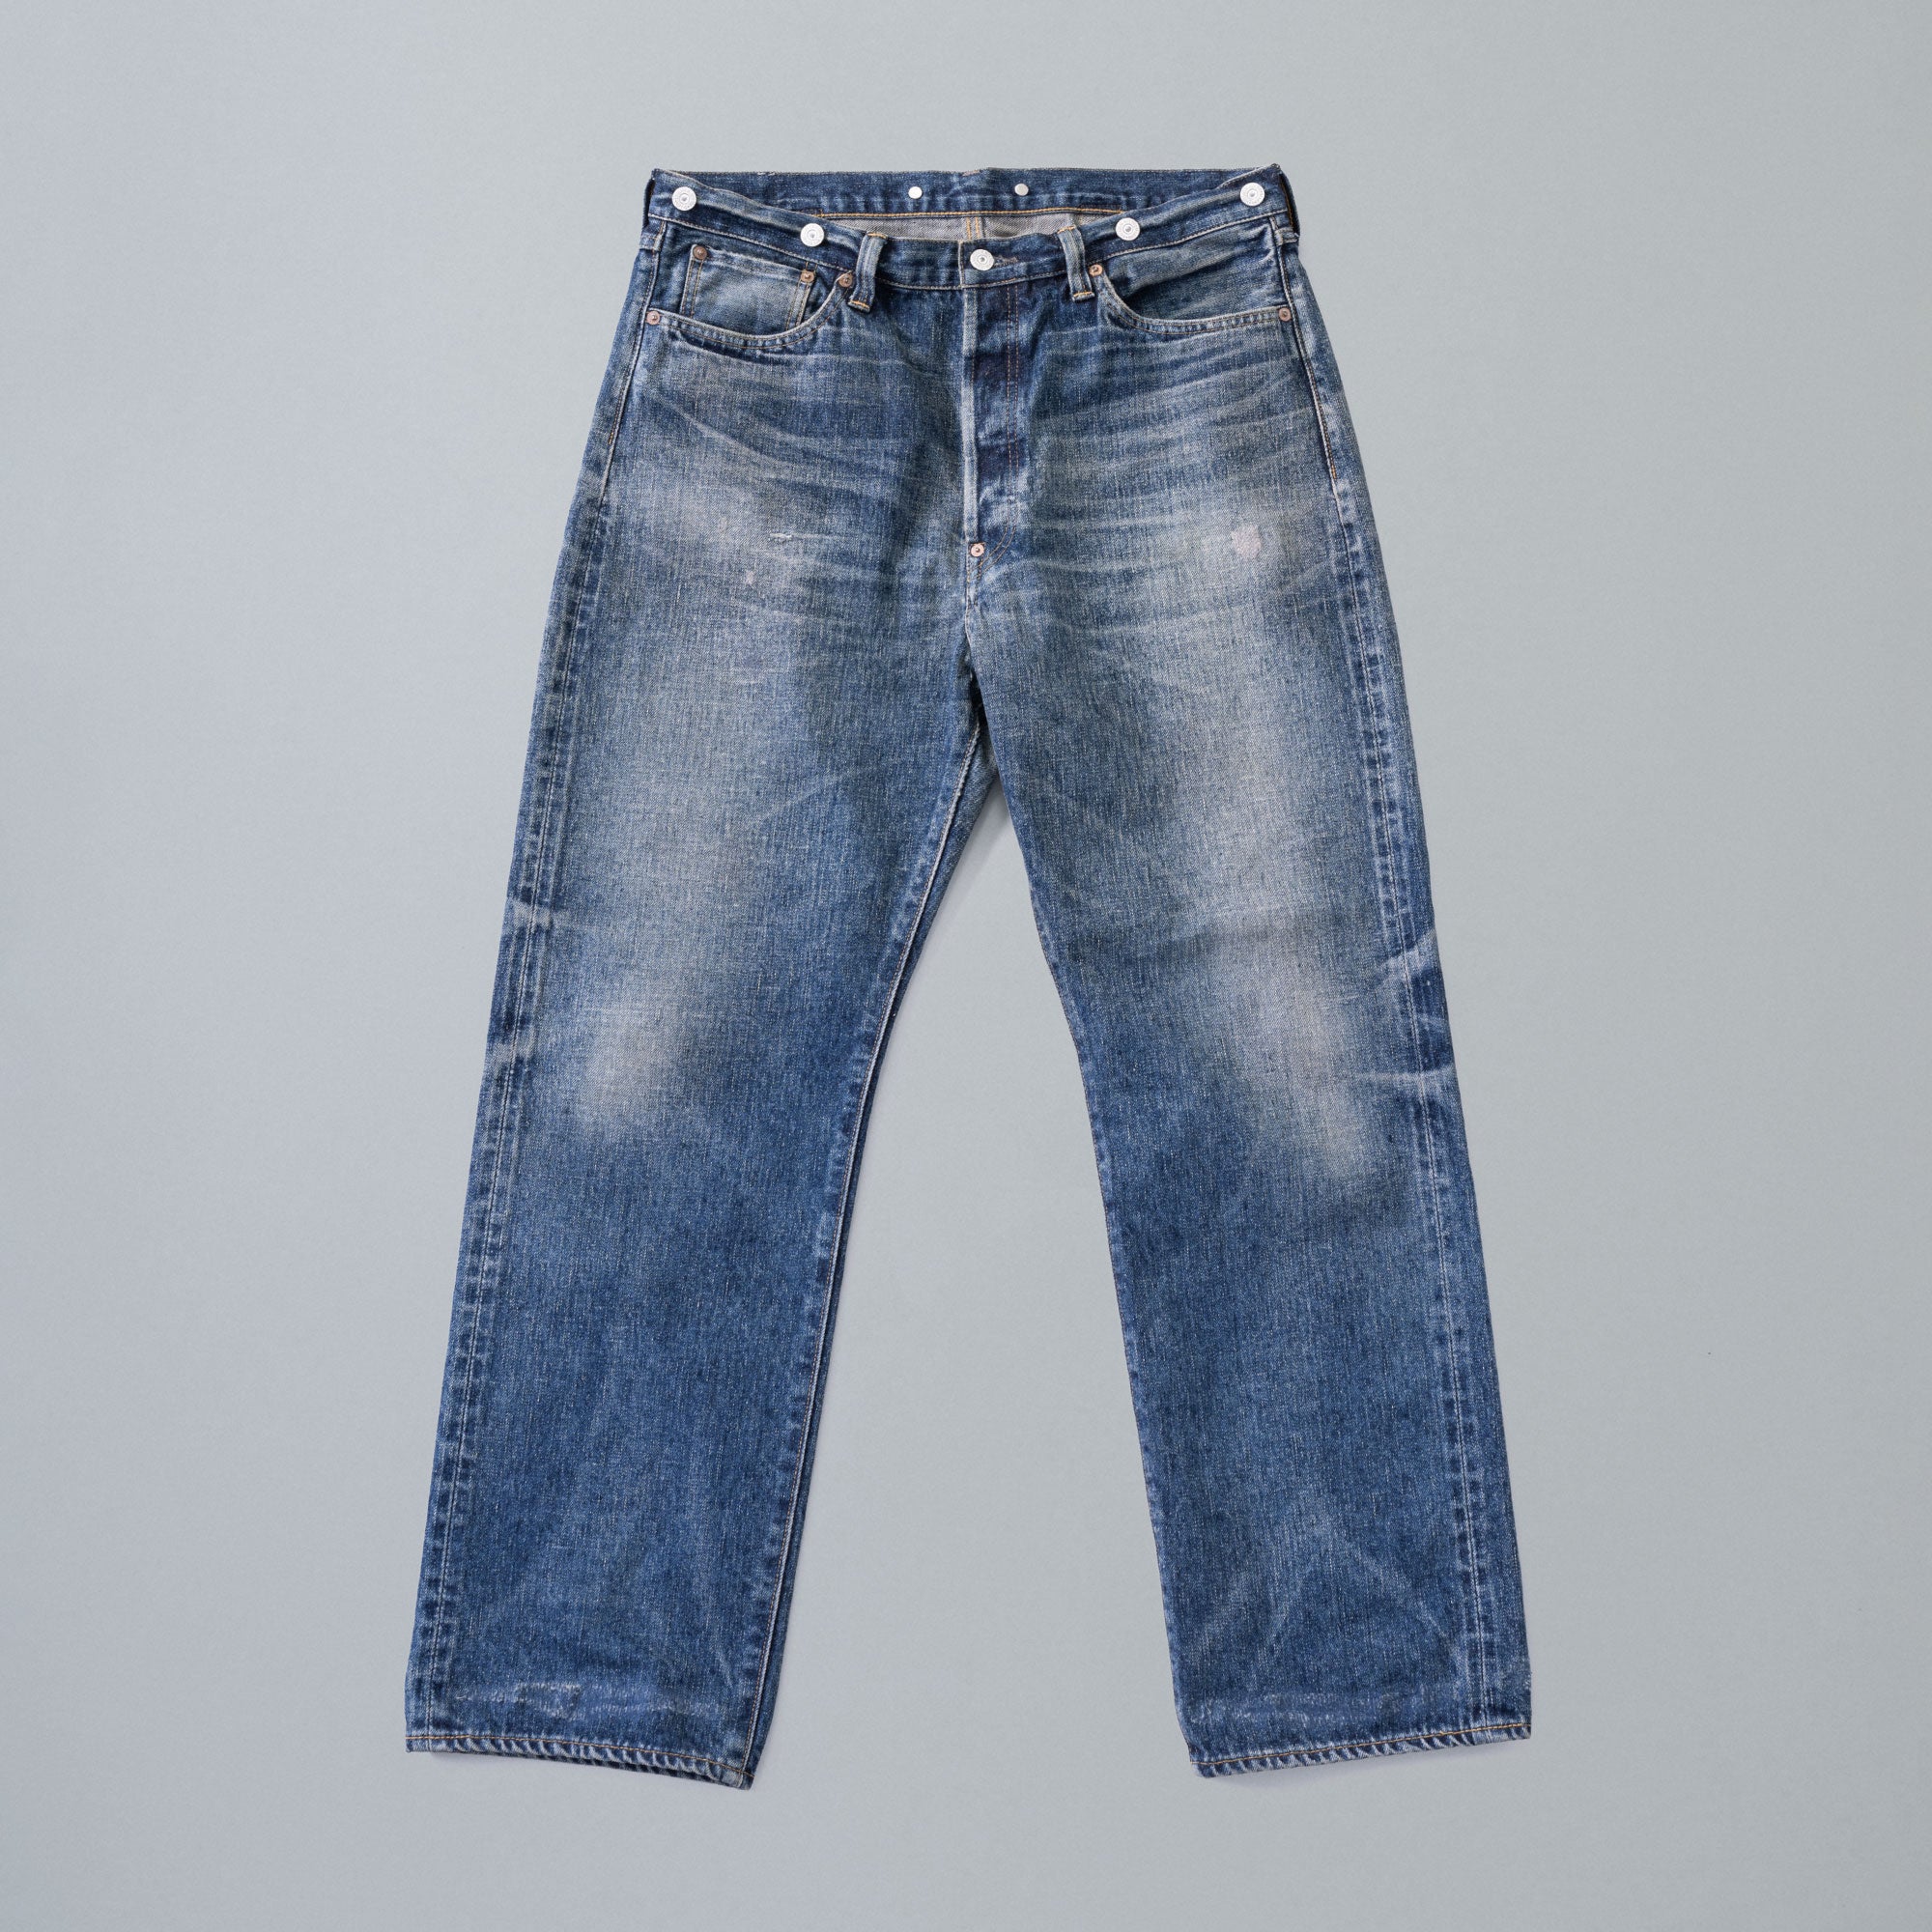 Size31New Manual 002 LV JEANS ISETANEXCLUSIVE